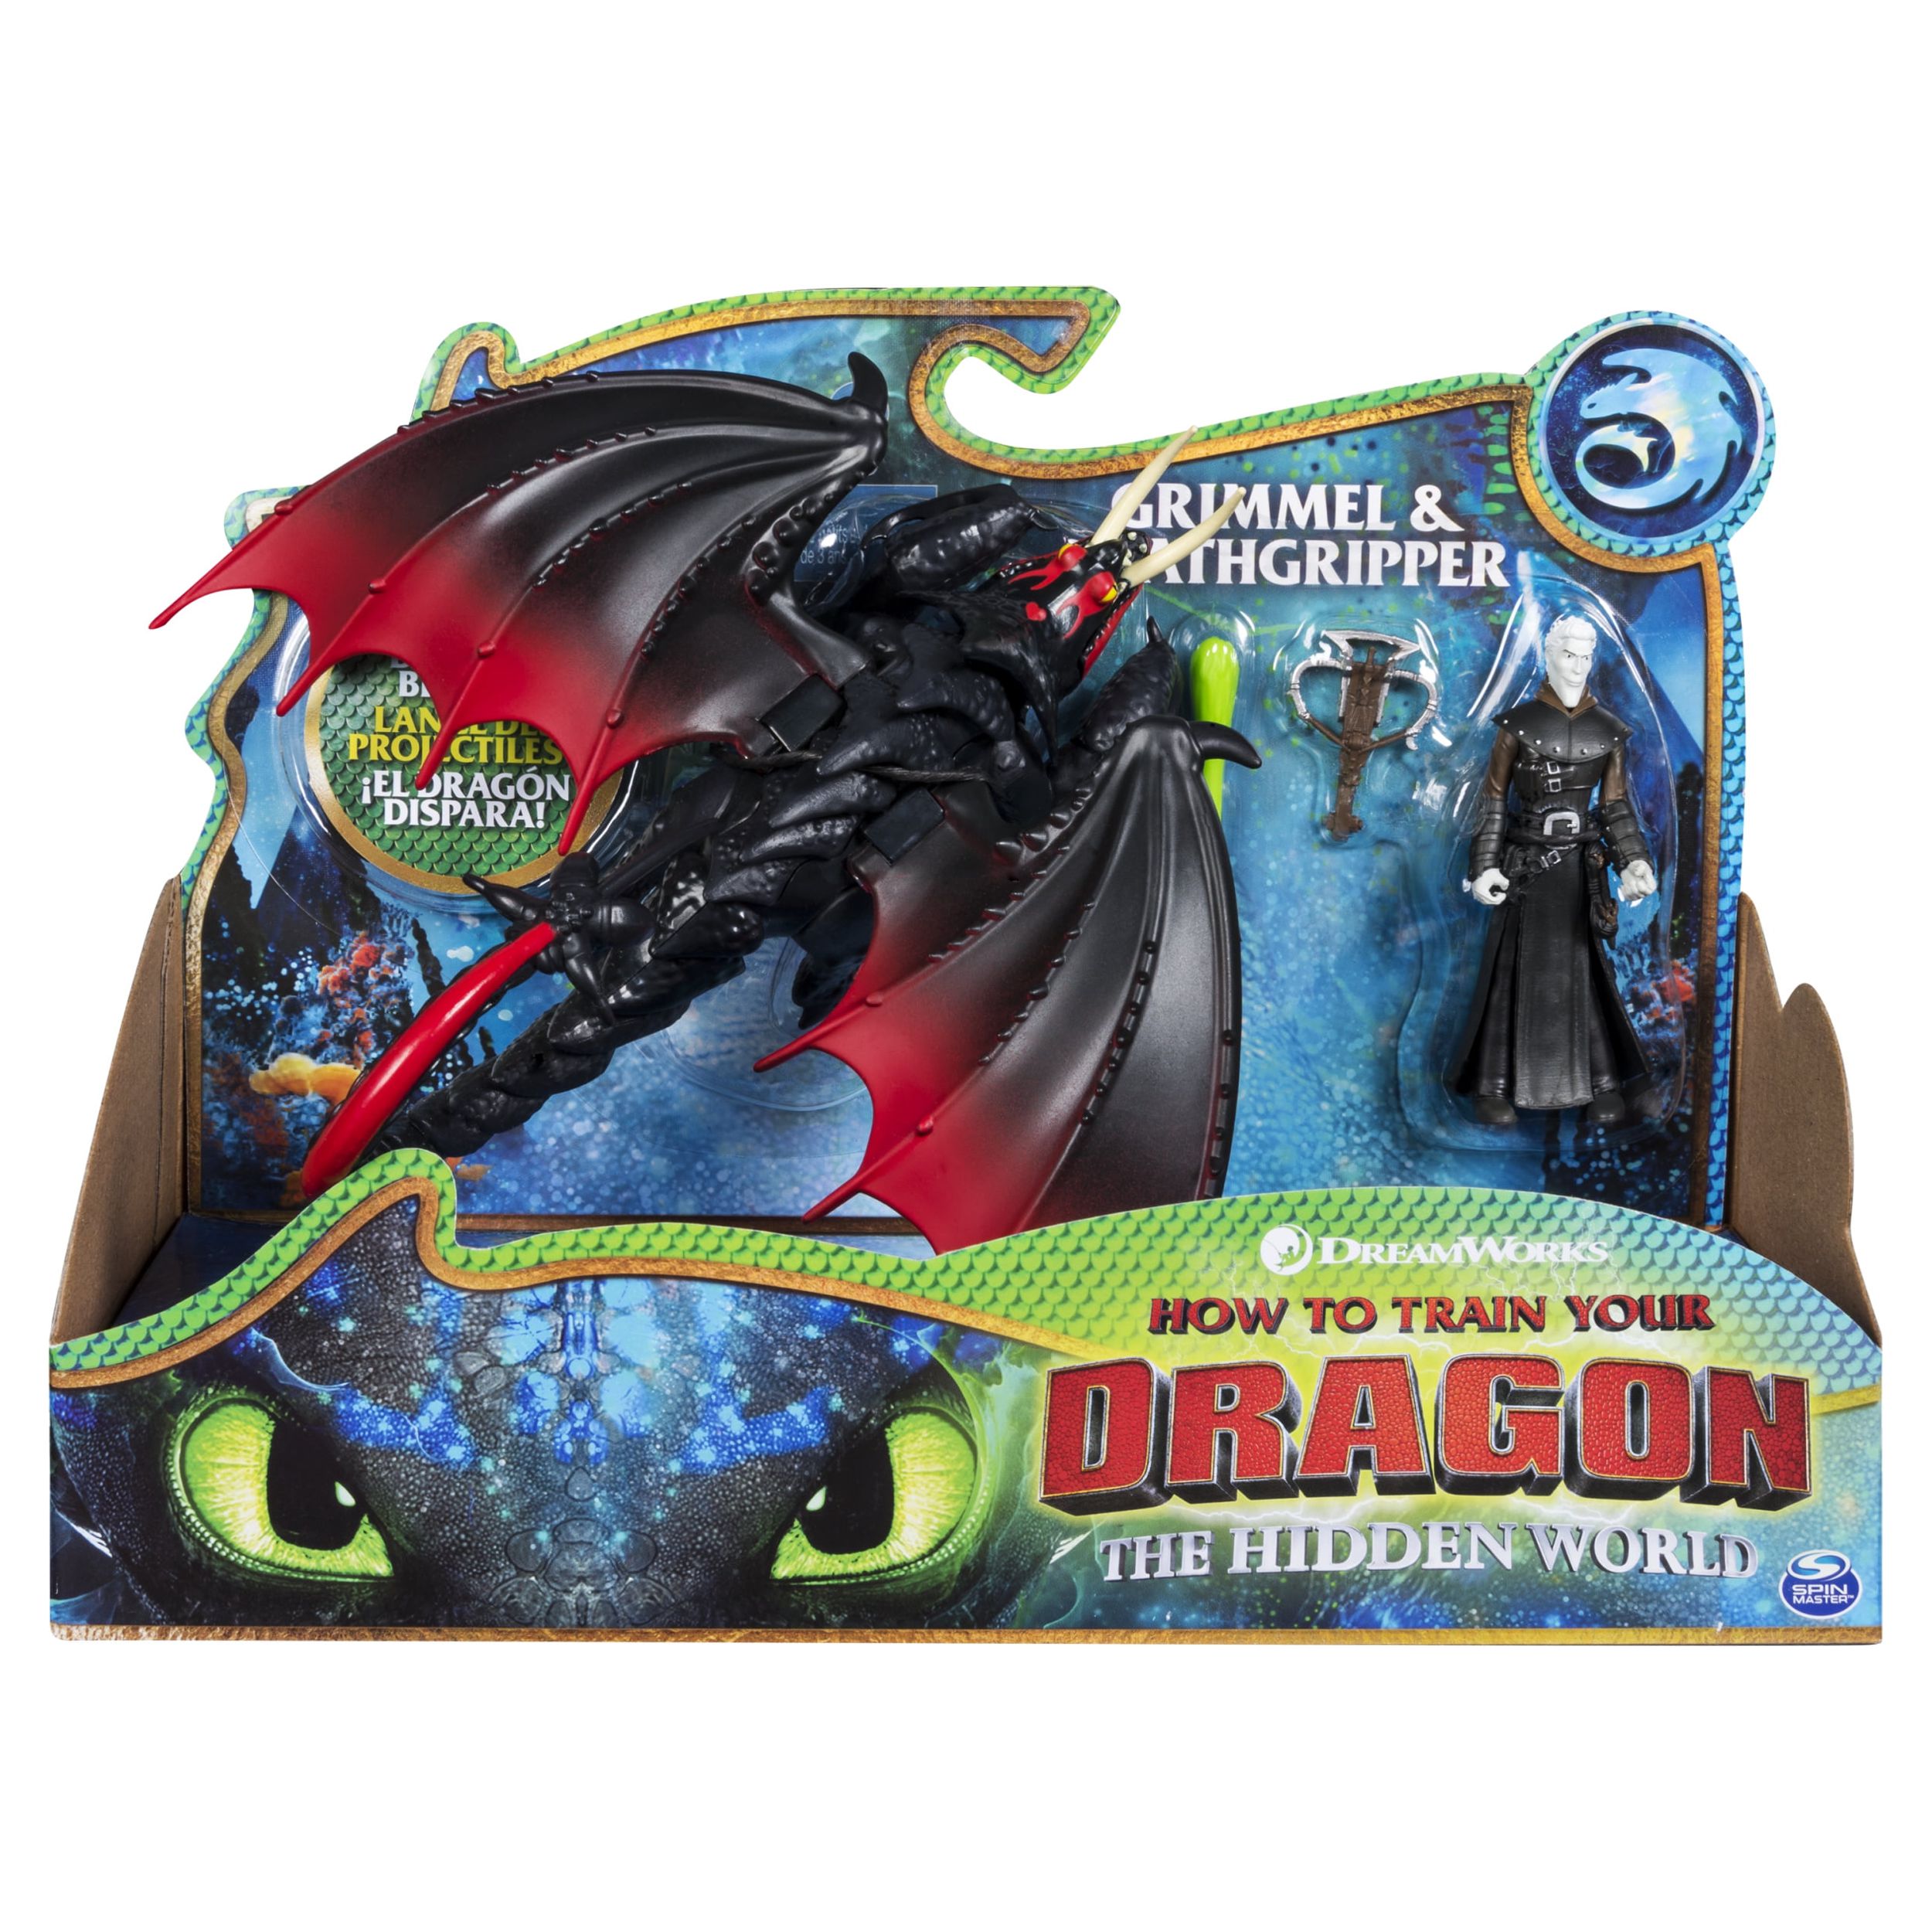 DreamWorks Dragons, Deathgripper and Grimmel, Dragon with Armored Viking Figure, for Kids Aged 4 and Up - image 1 of 6